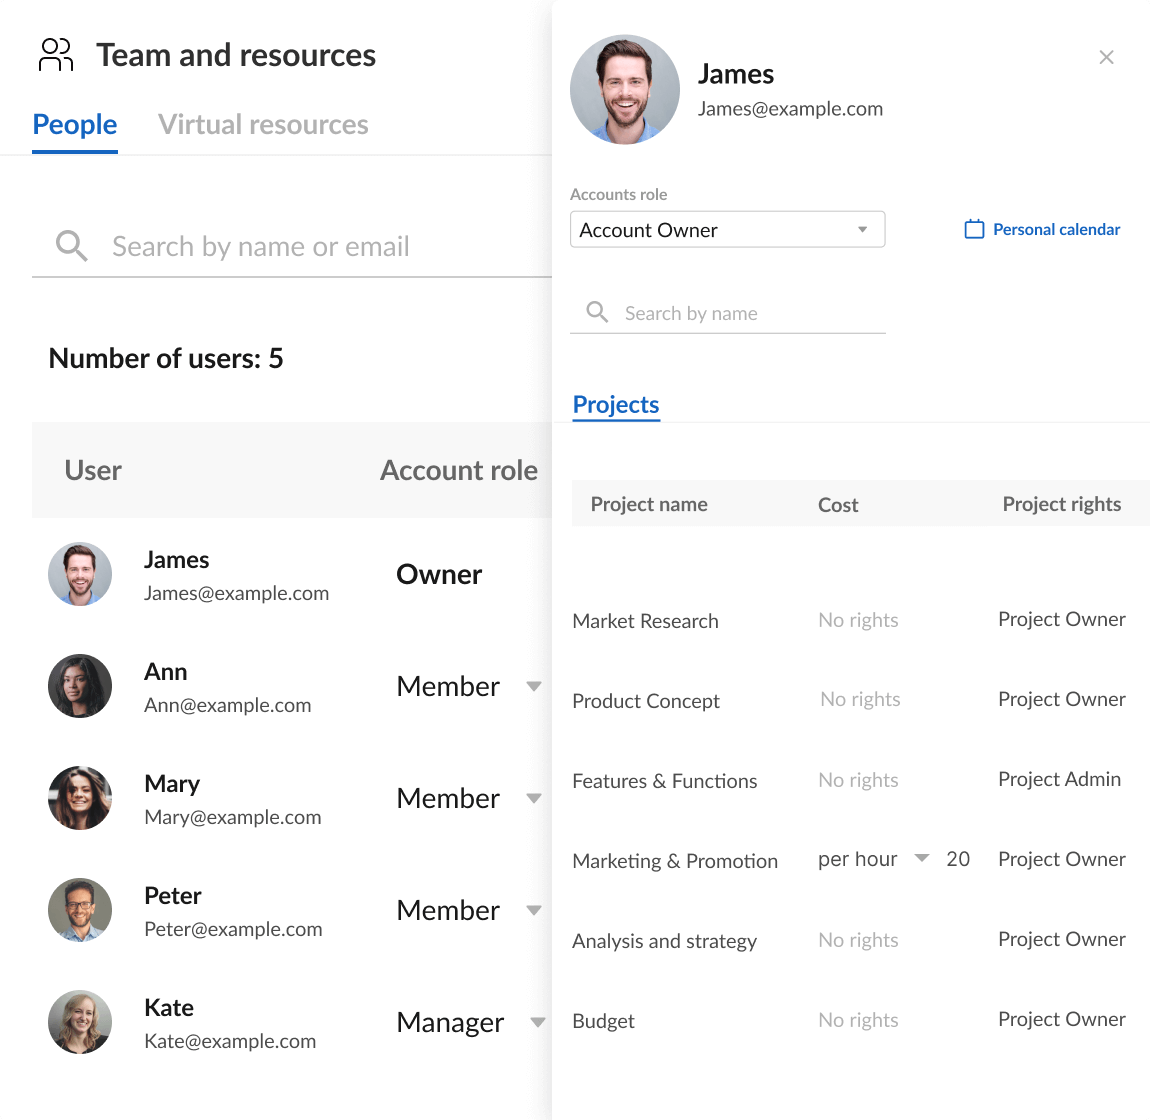 Team members and resources